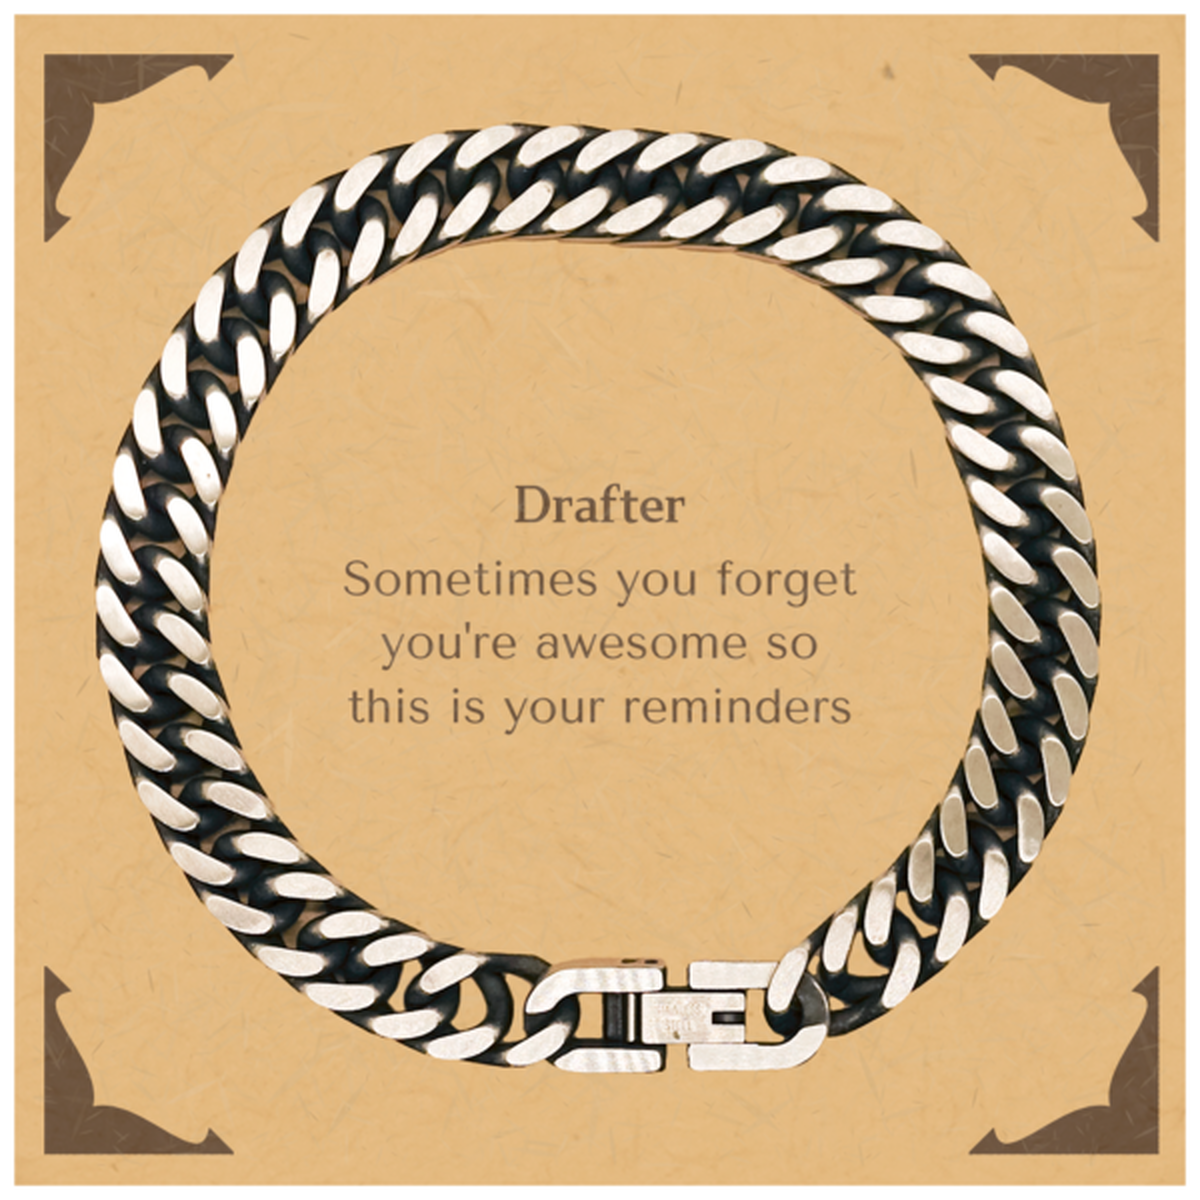 Sentimental Drafter Cuban Link Chain Bracelet, Drafter Sometimes you forget you're awesome so this is your reminders, Graduation Christmas Birthday Gifts for Drafter, Men, Women, Coworkers